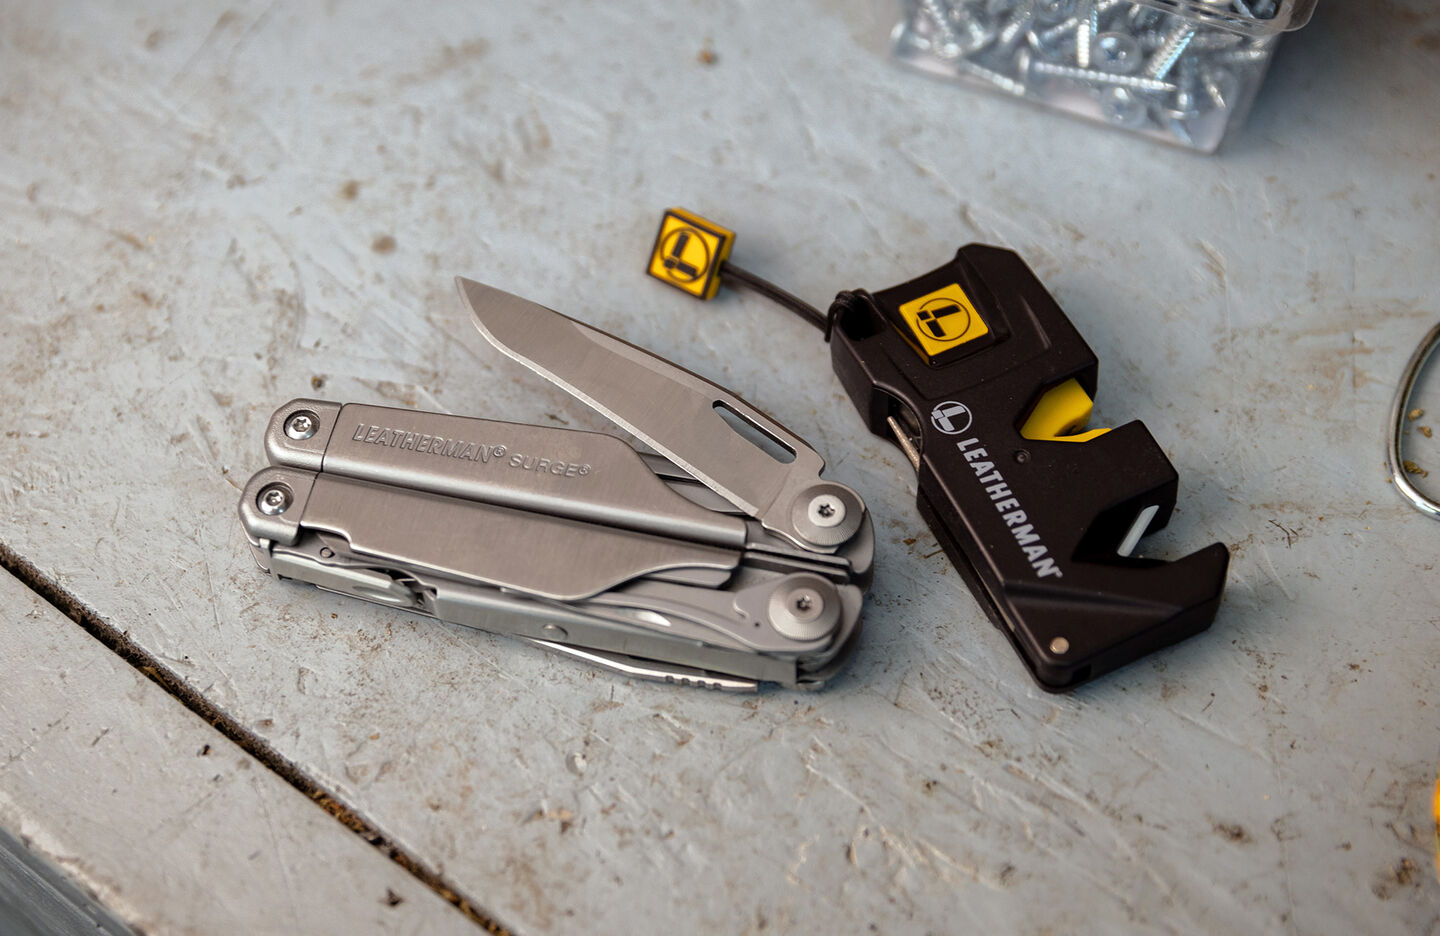 Leatherman Surge with blade opened next to Leatherman Blade Sharpener